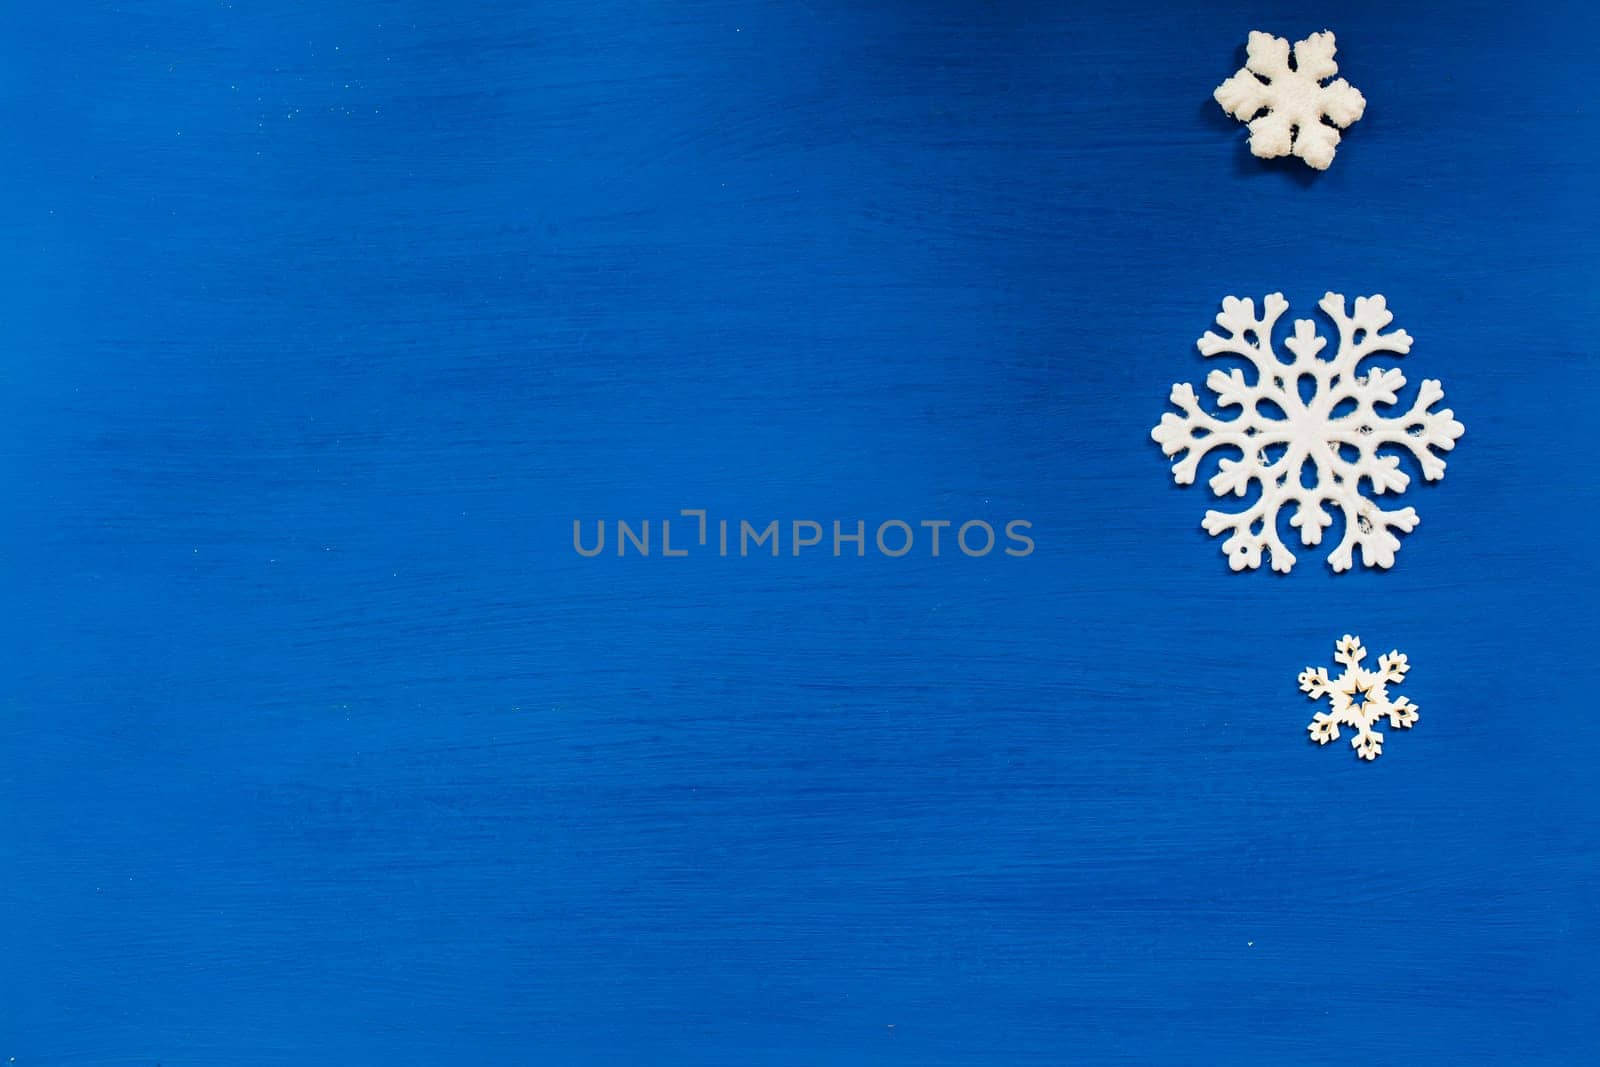 Christmas card gifts decor for the new year against a winter backdrop by Simakov